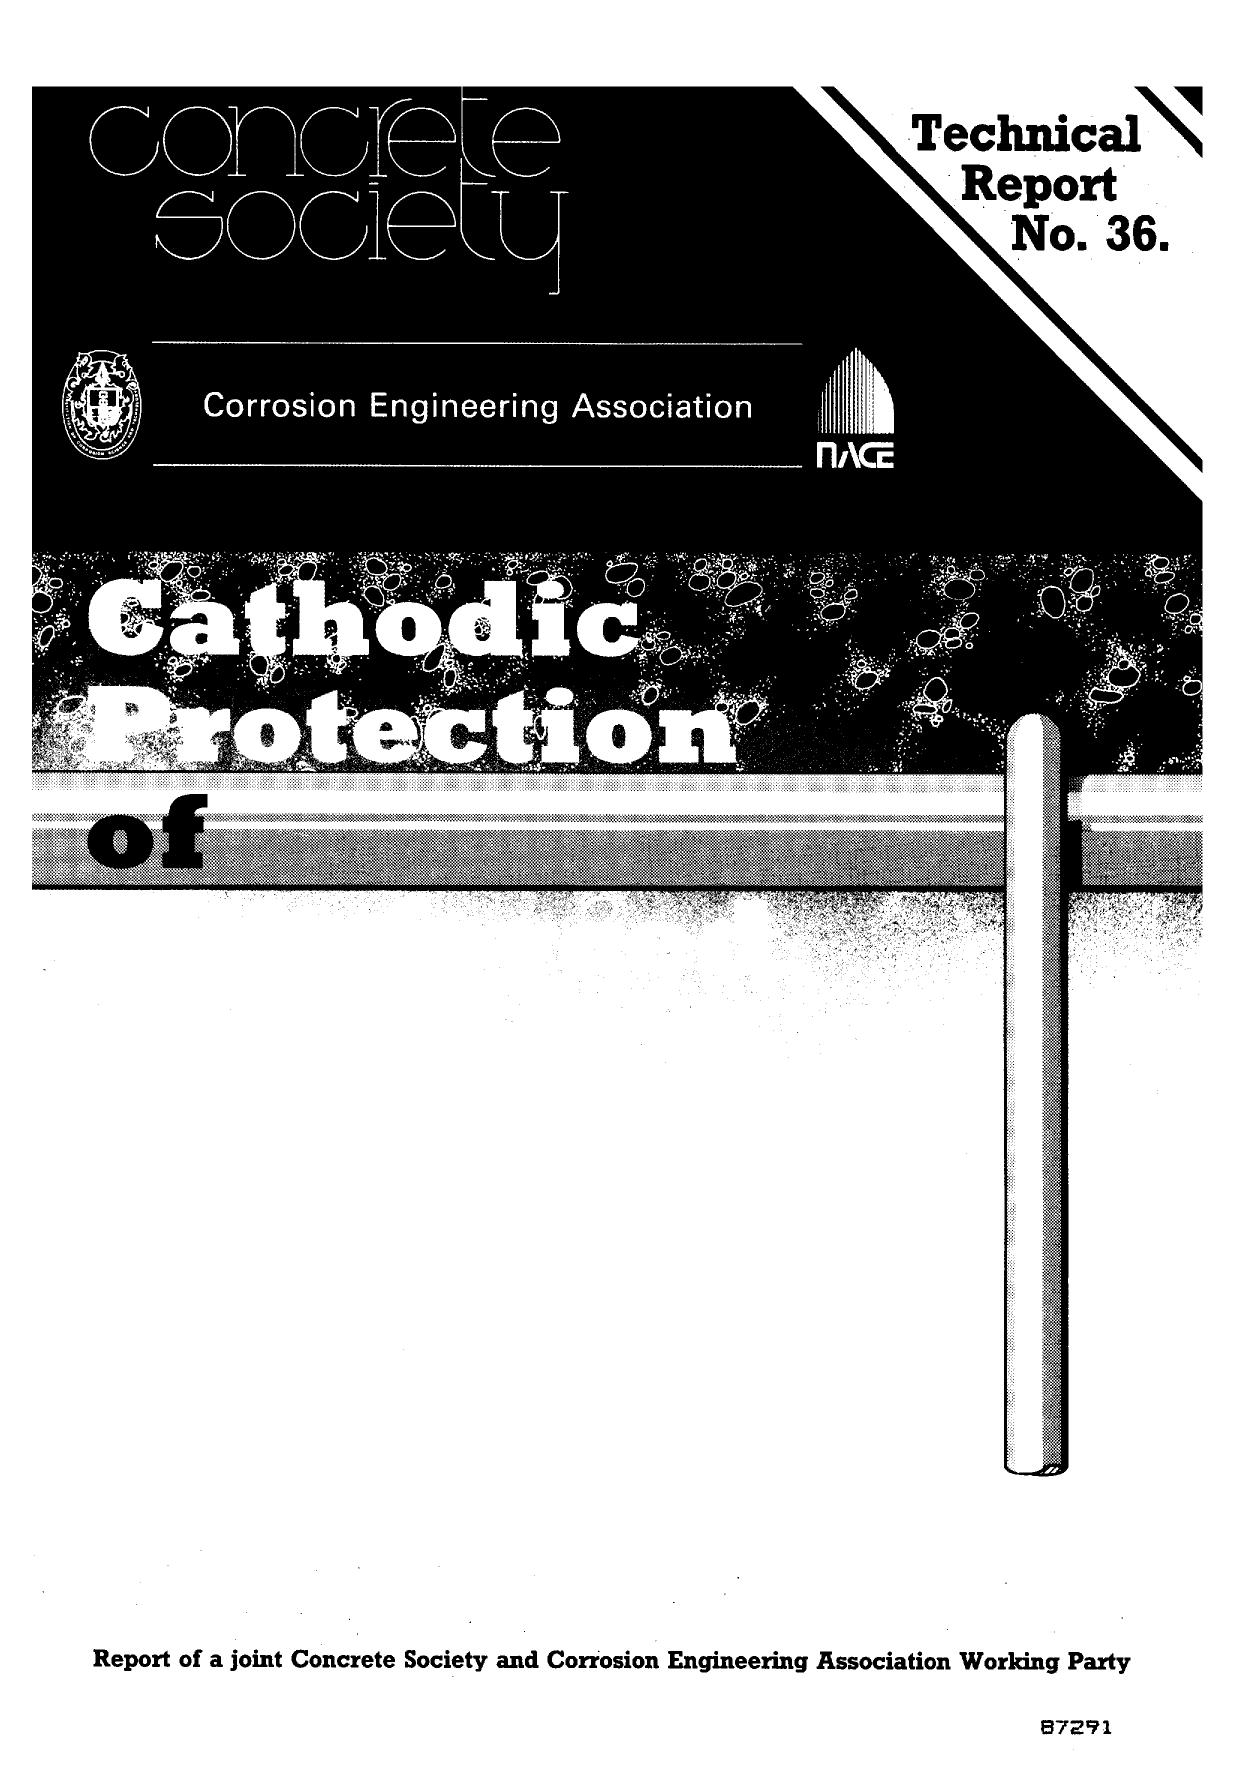 Cathodic protection of reinforced concrete